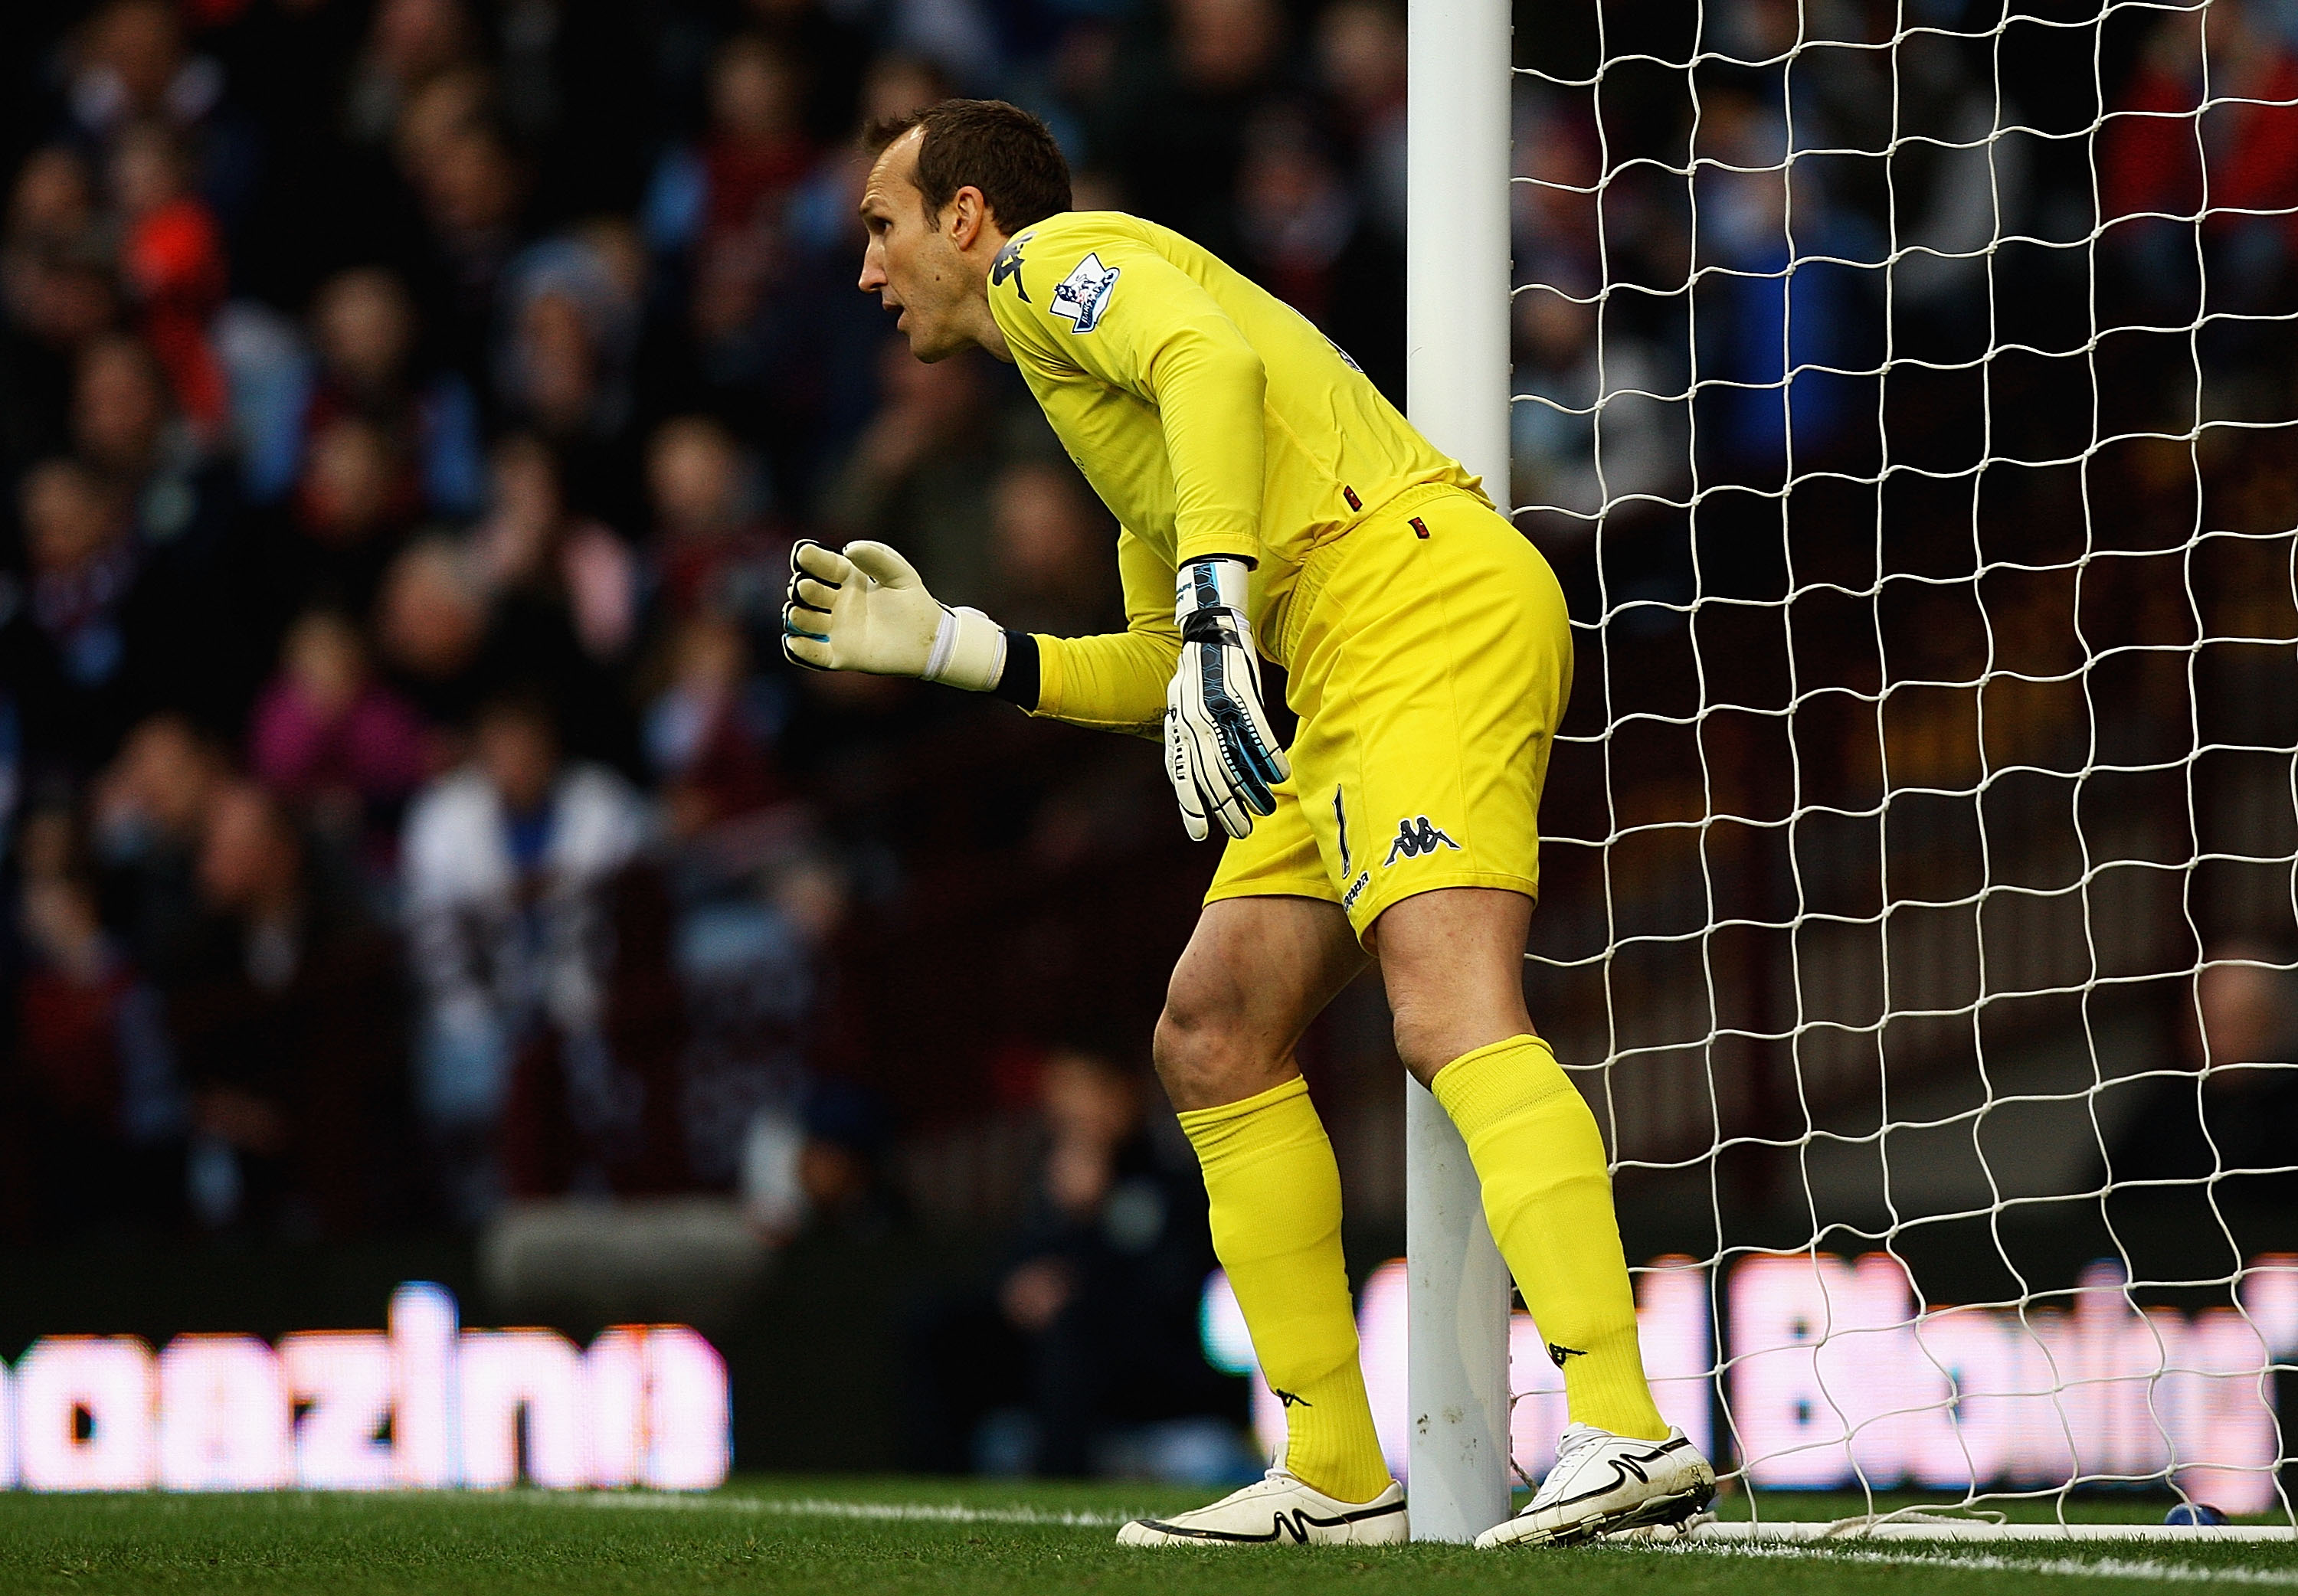 BIRMINGHAM, ENGLAND - FEBRUARY 05:  Mark Schwarzer of Fulham in action during the Barclays Premier League match between Aston Villa and Fulham at Villa Park on February 5, 2011 in Birmingham, England.  (Photo by Matthew Lewis/Getty Images)